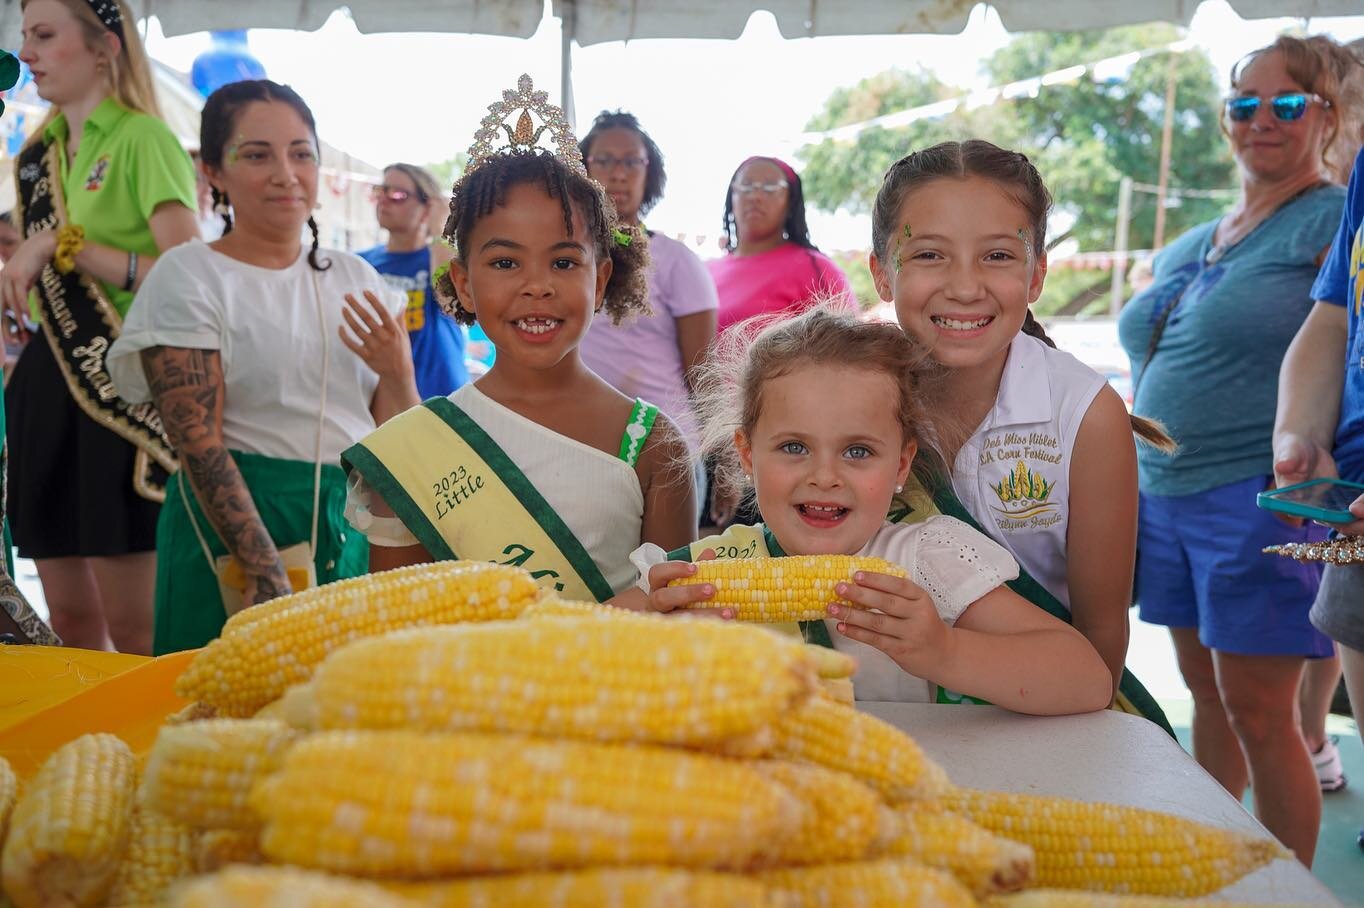 Shucking and eating&hellip;a little corn-y competition to start the final day of LaCornFest